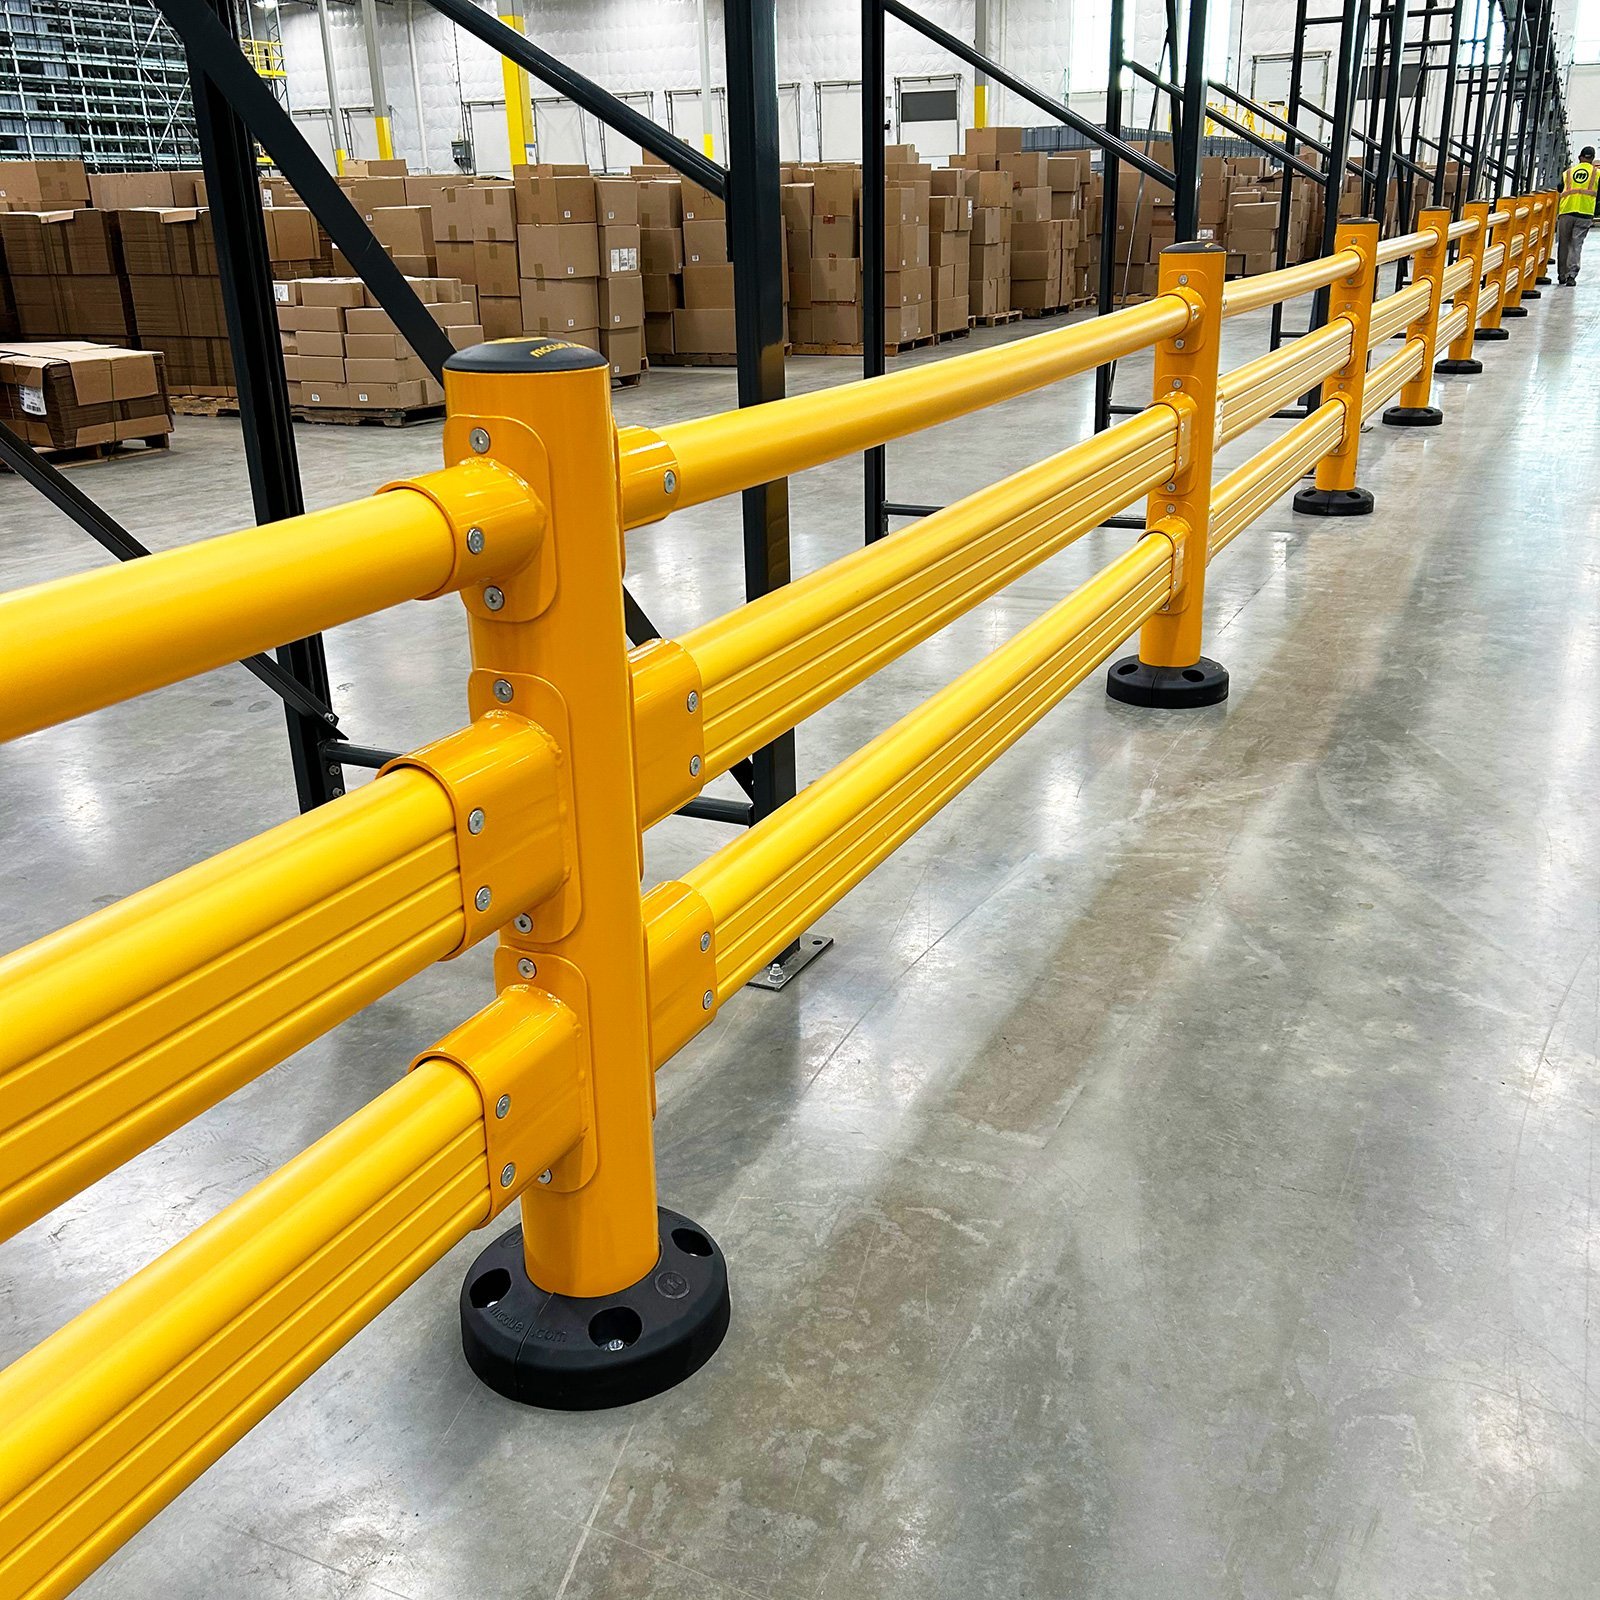 Protecting Workers: The Crucial Role of Safety Guardrails